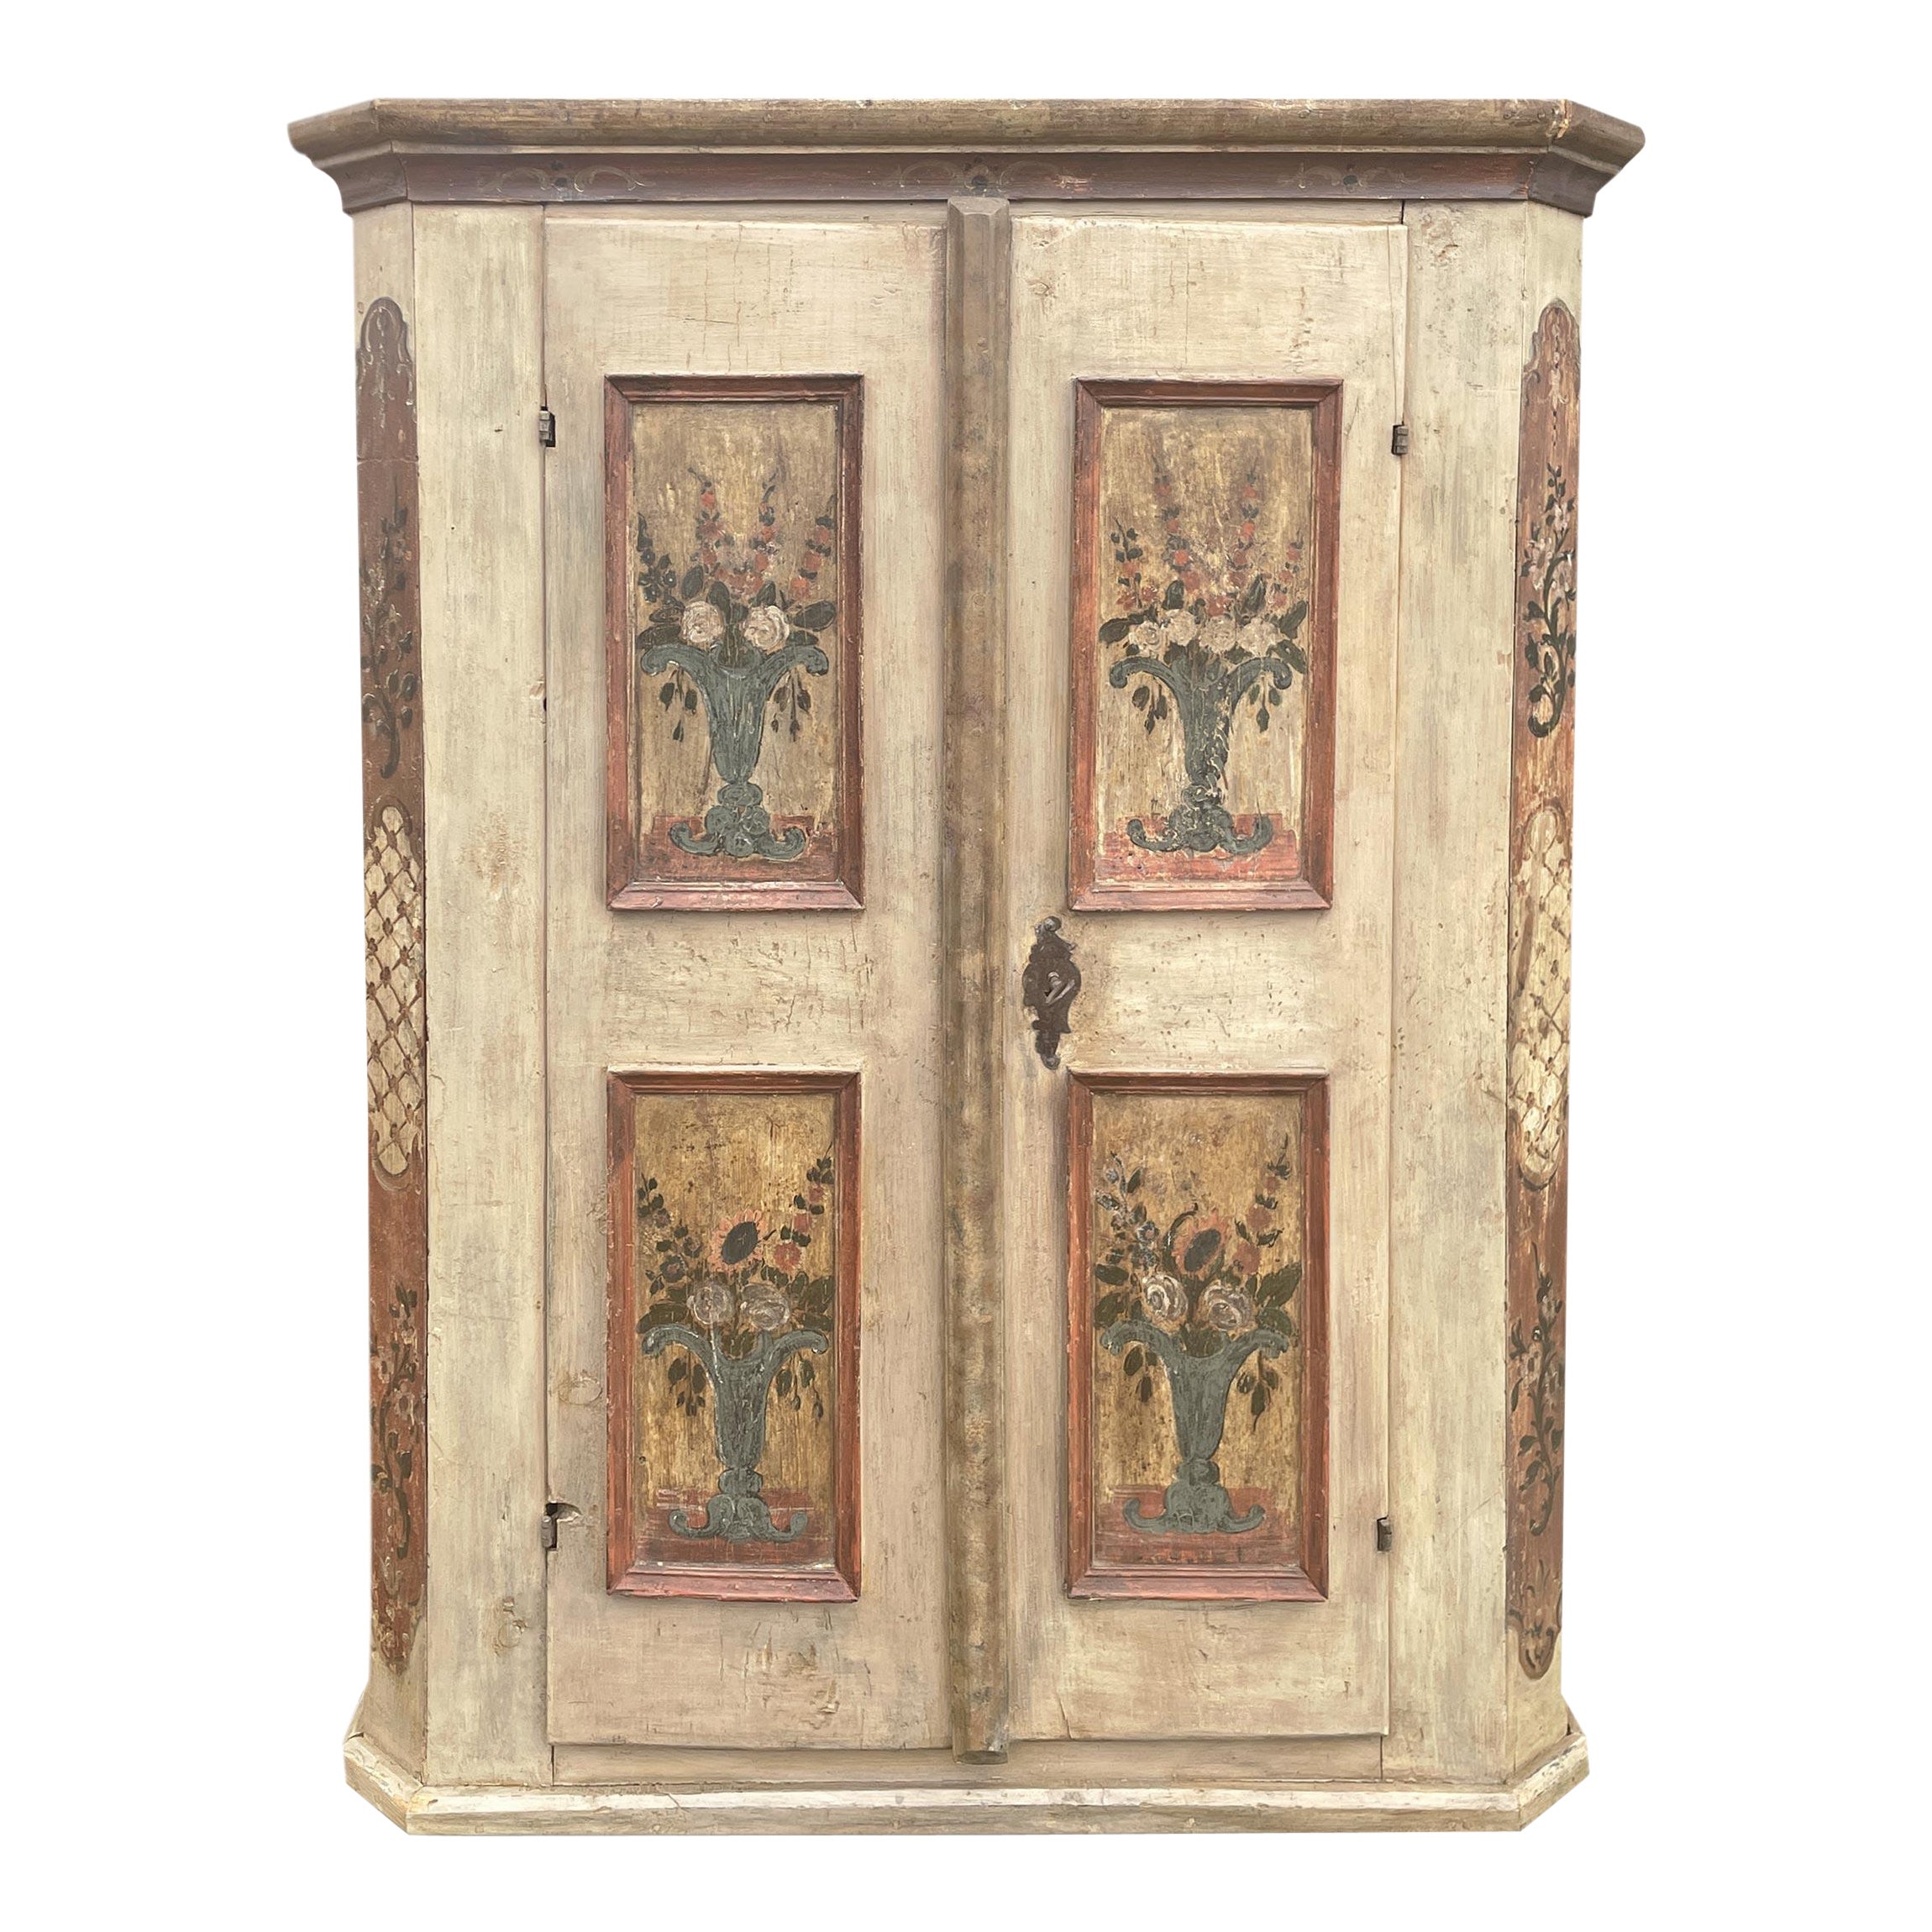 1780 Antique White floral Painted Tyrolean Cabinet